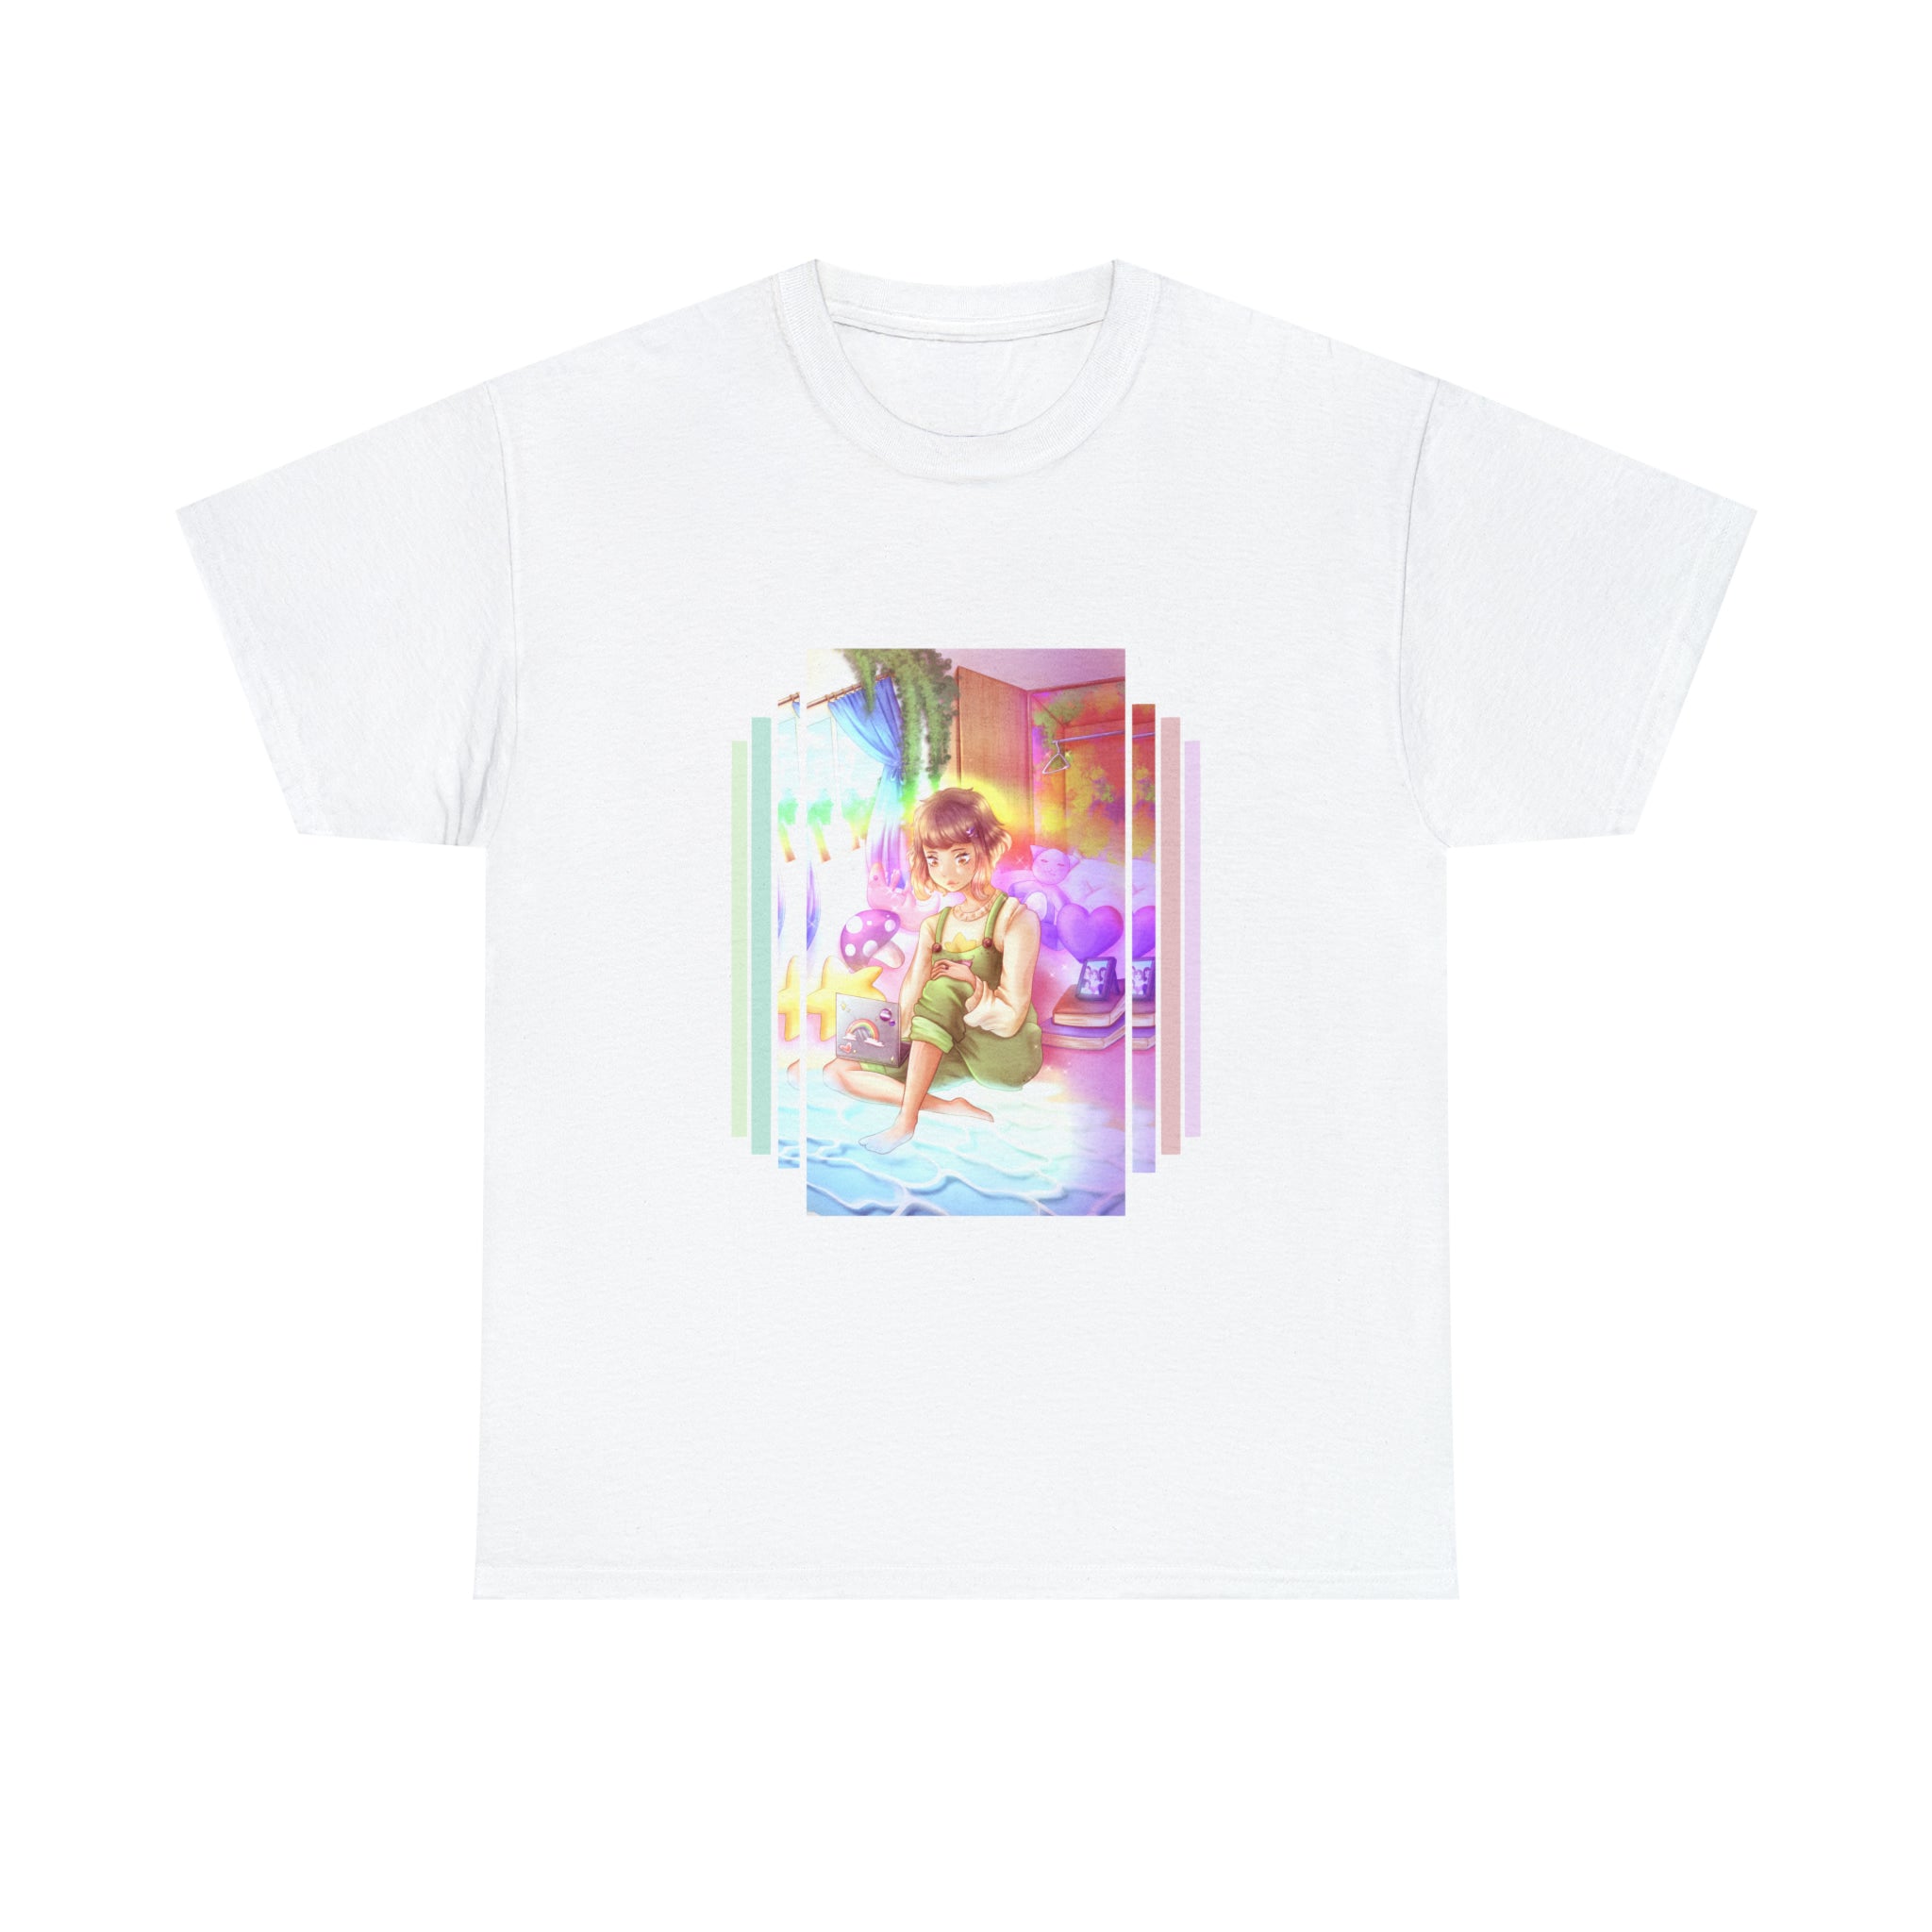 An Room Pride T-Shirt cotton t-shirt featuring artwork of a girl sitting on a bed.